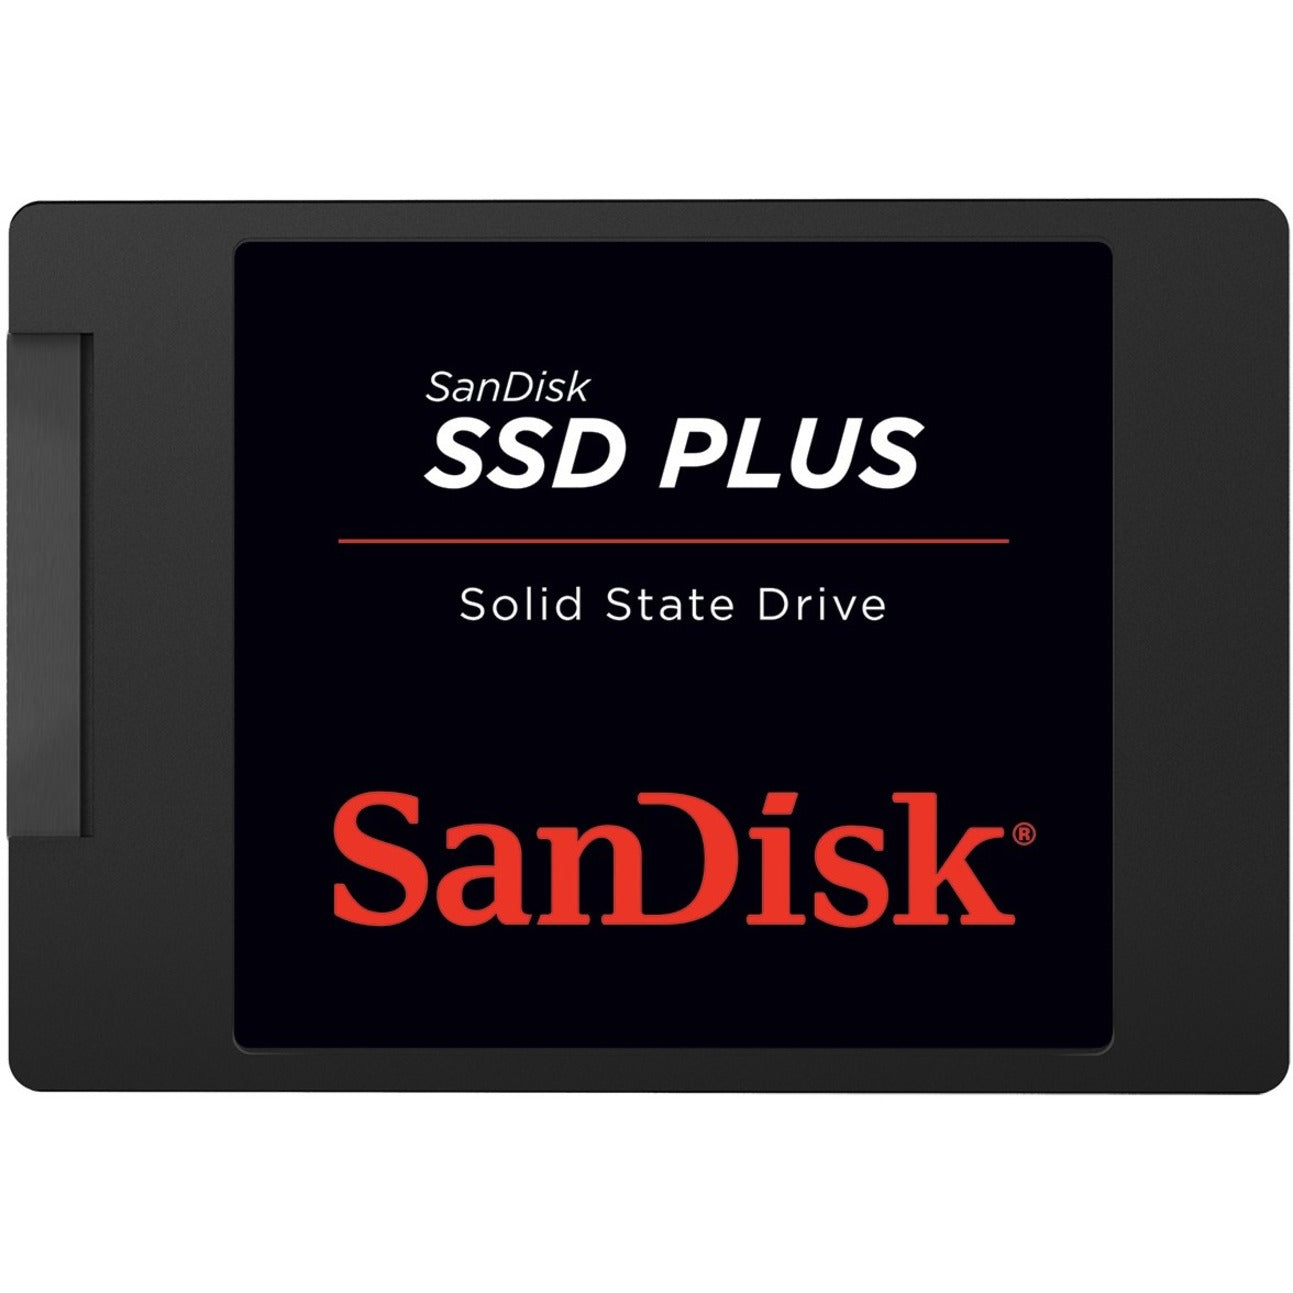 SanDisk SDSSDA-2T00-G26 SSD PLUS 2 TB Solid State Drive, Faster Performance and Reliable Storage